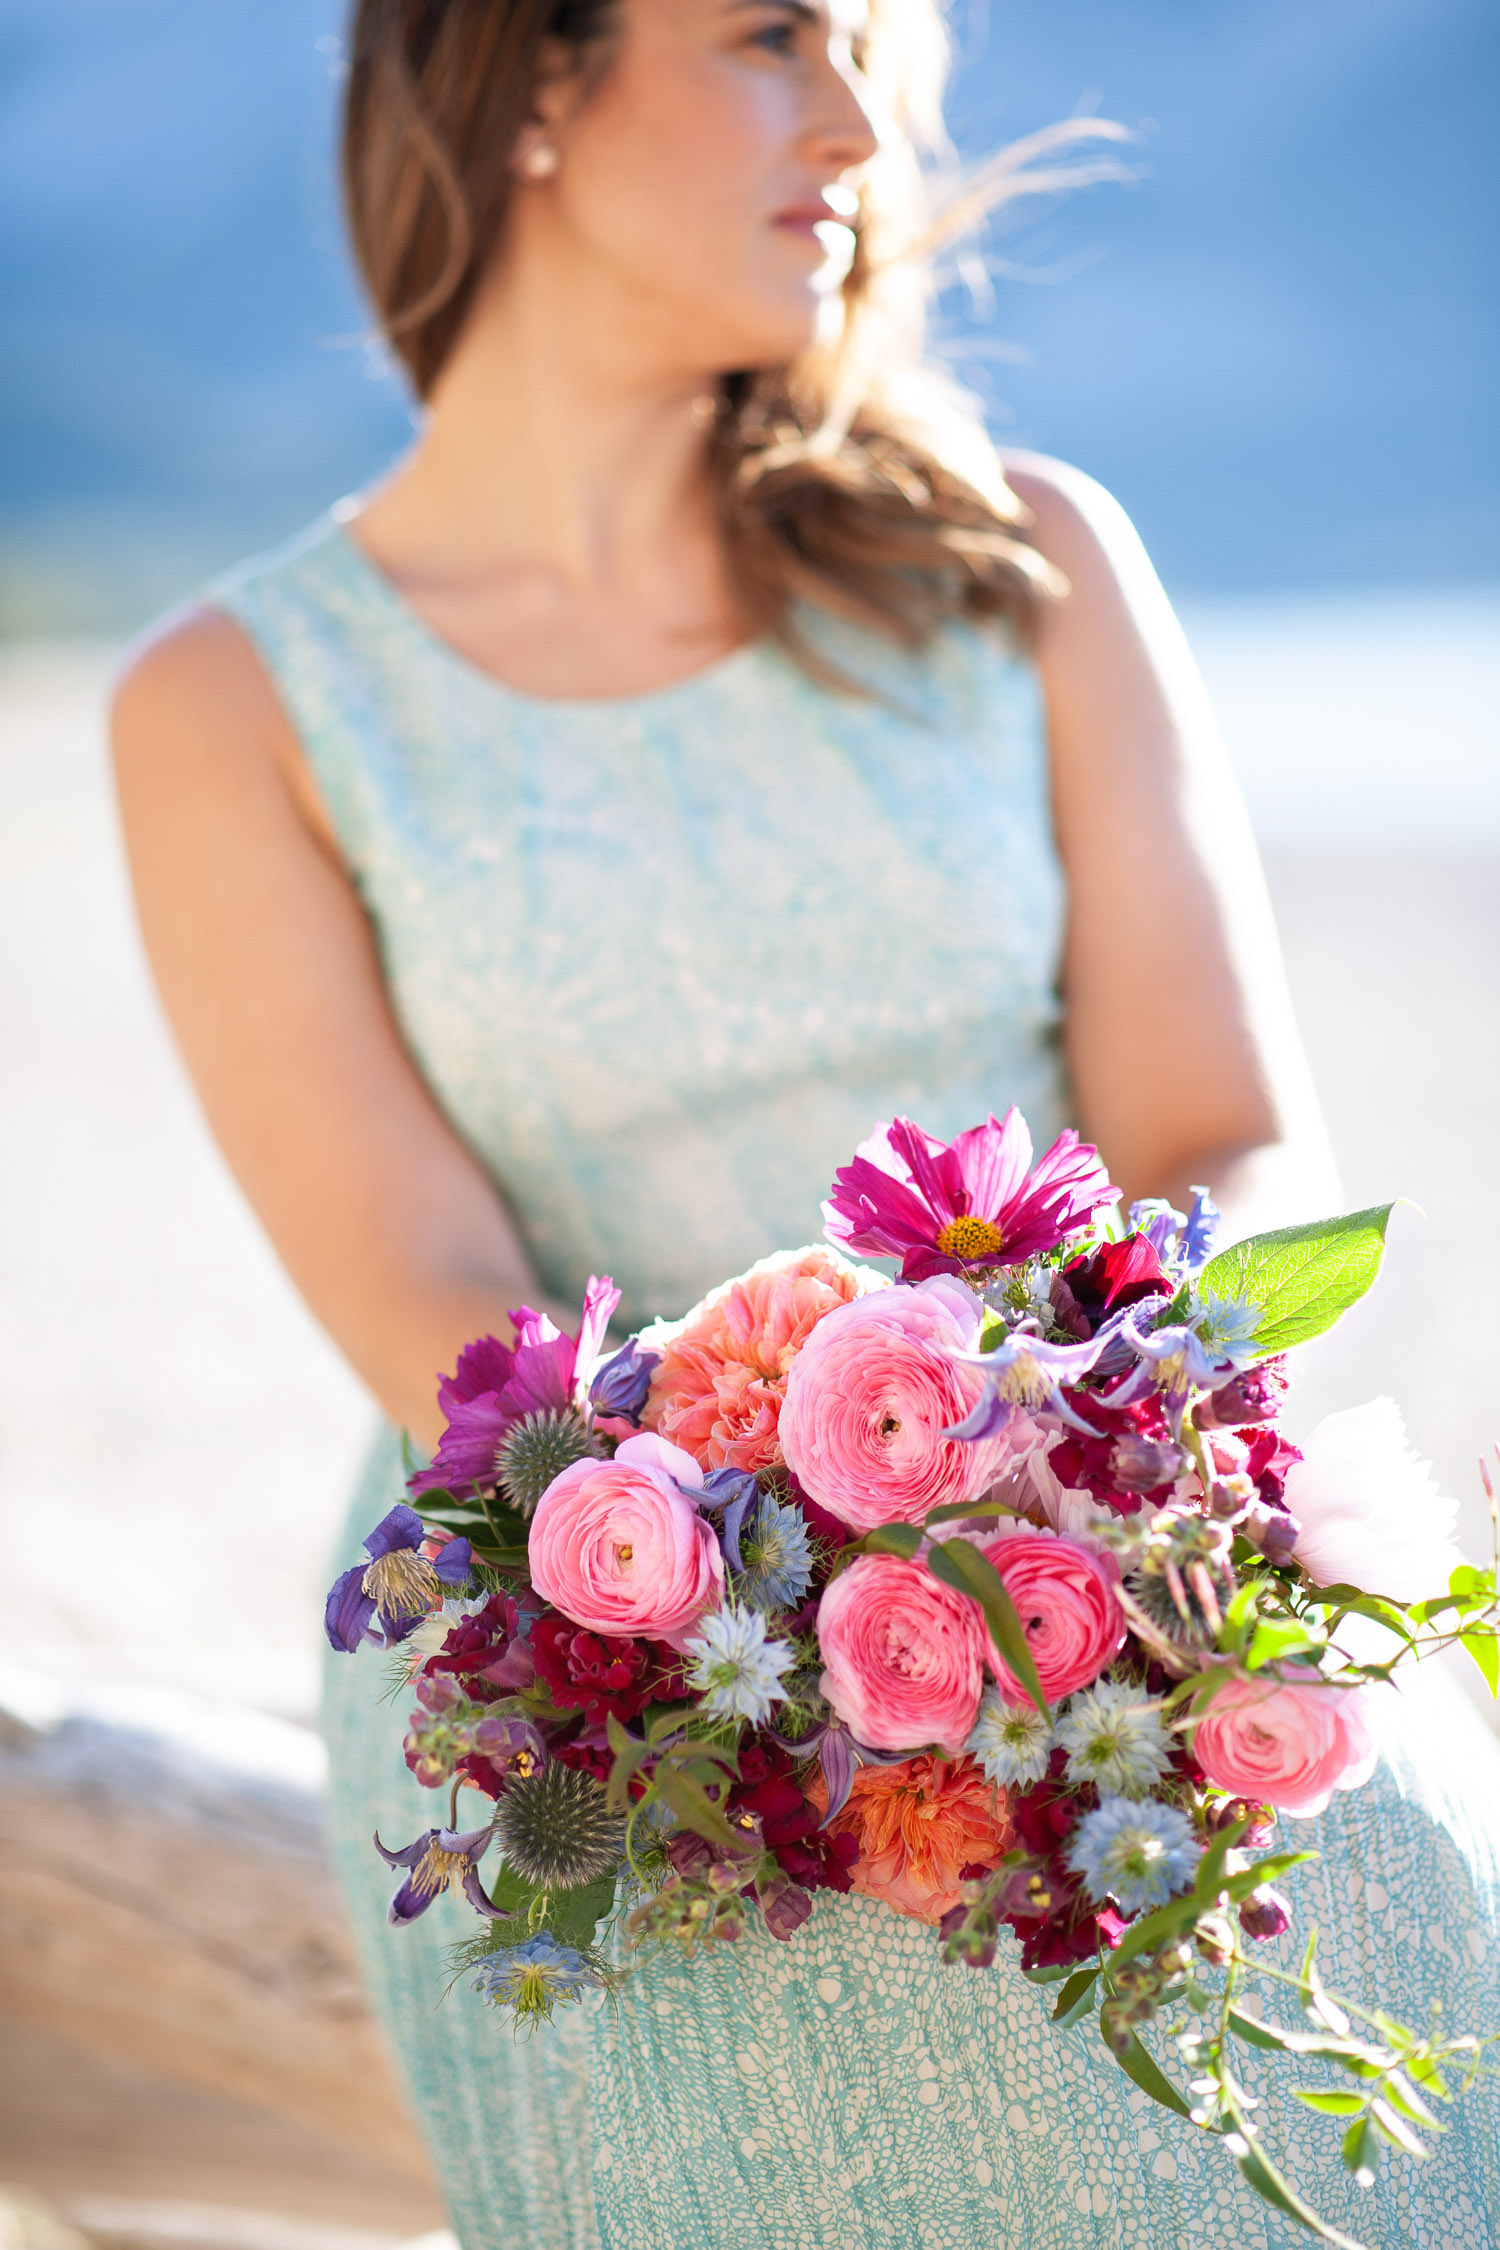 Flowers by Janie captured with a pretty summer bouquet by Tara Whittaker Photography